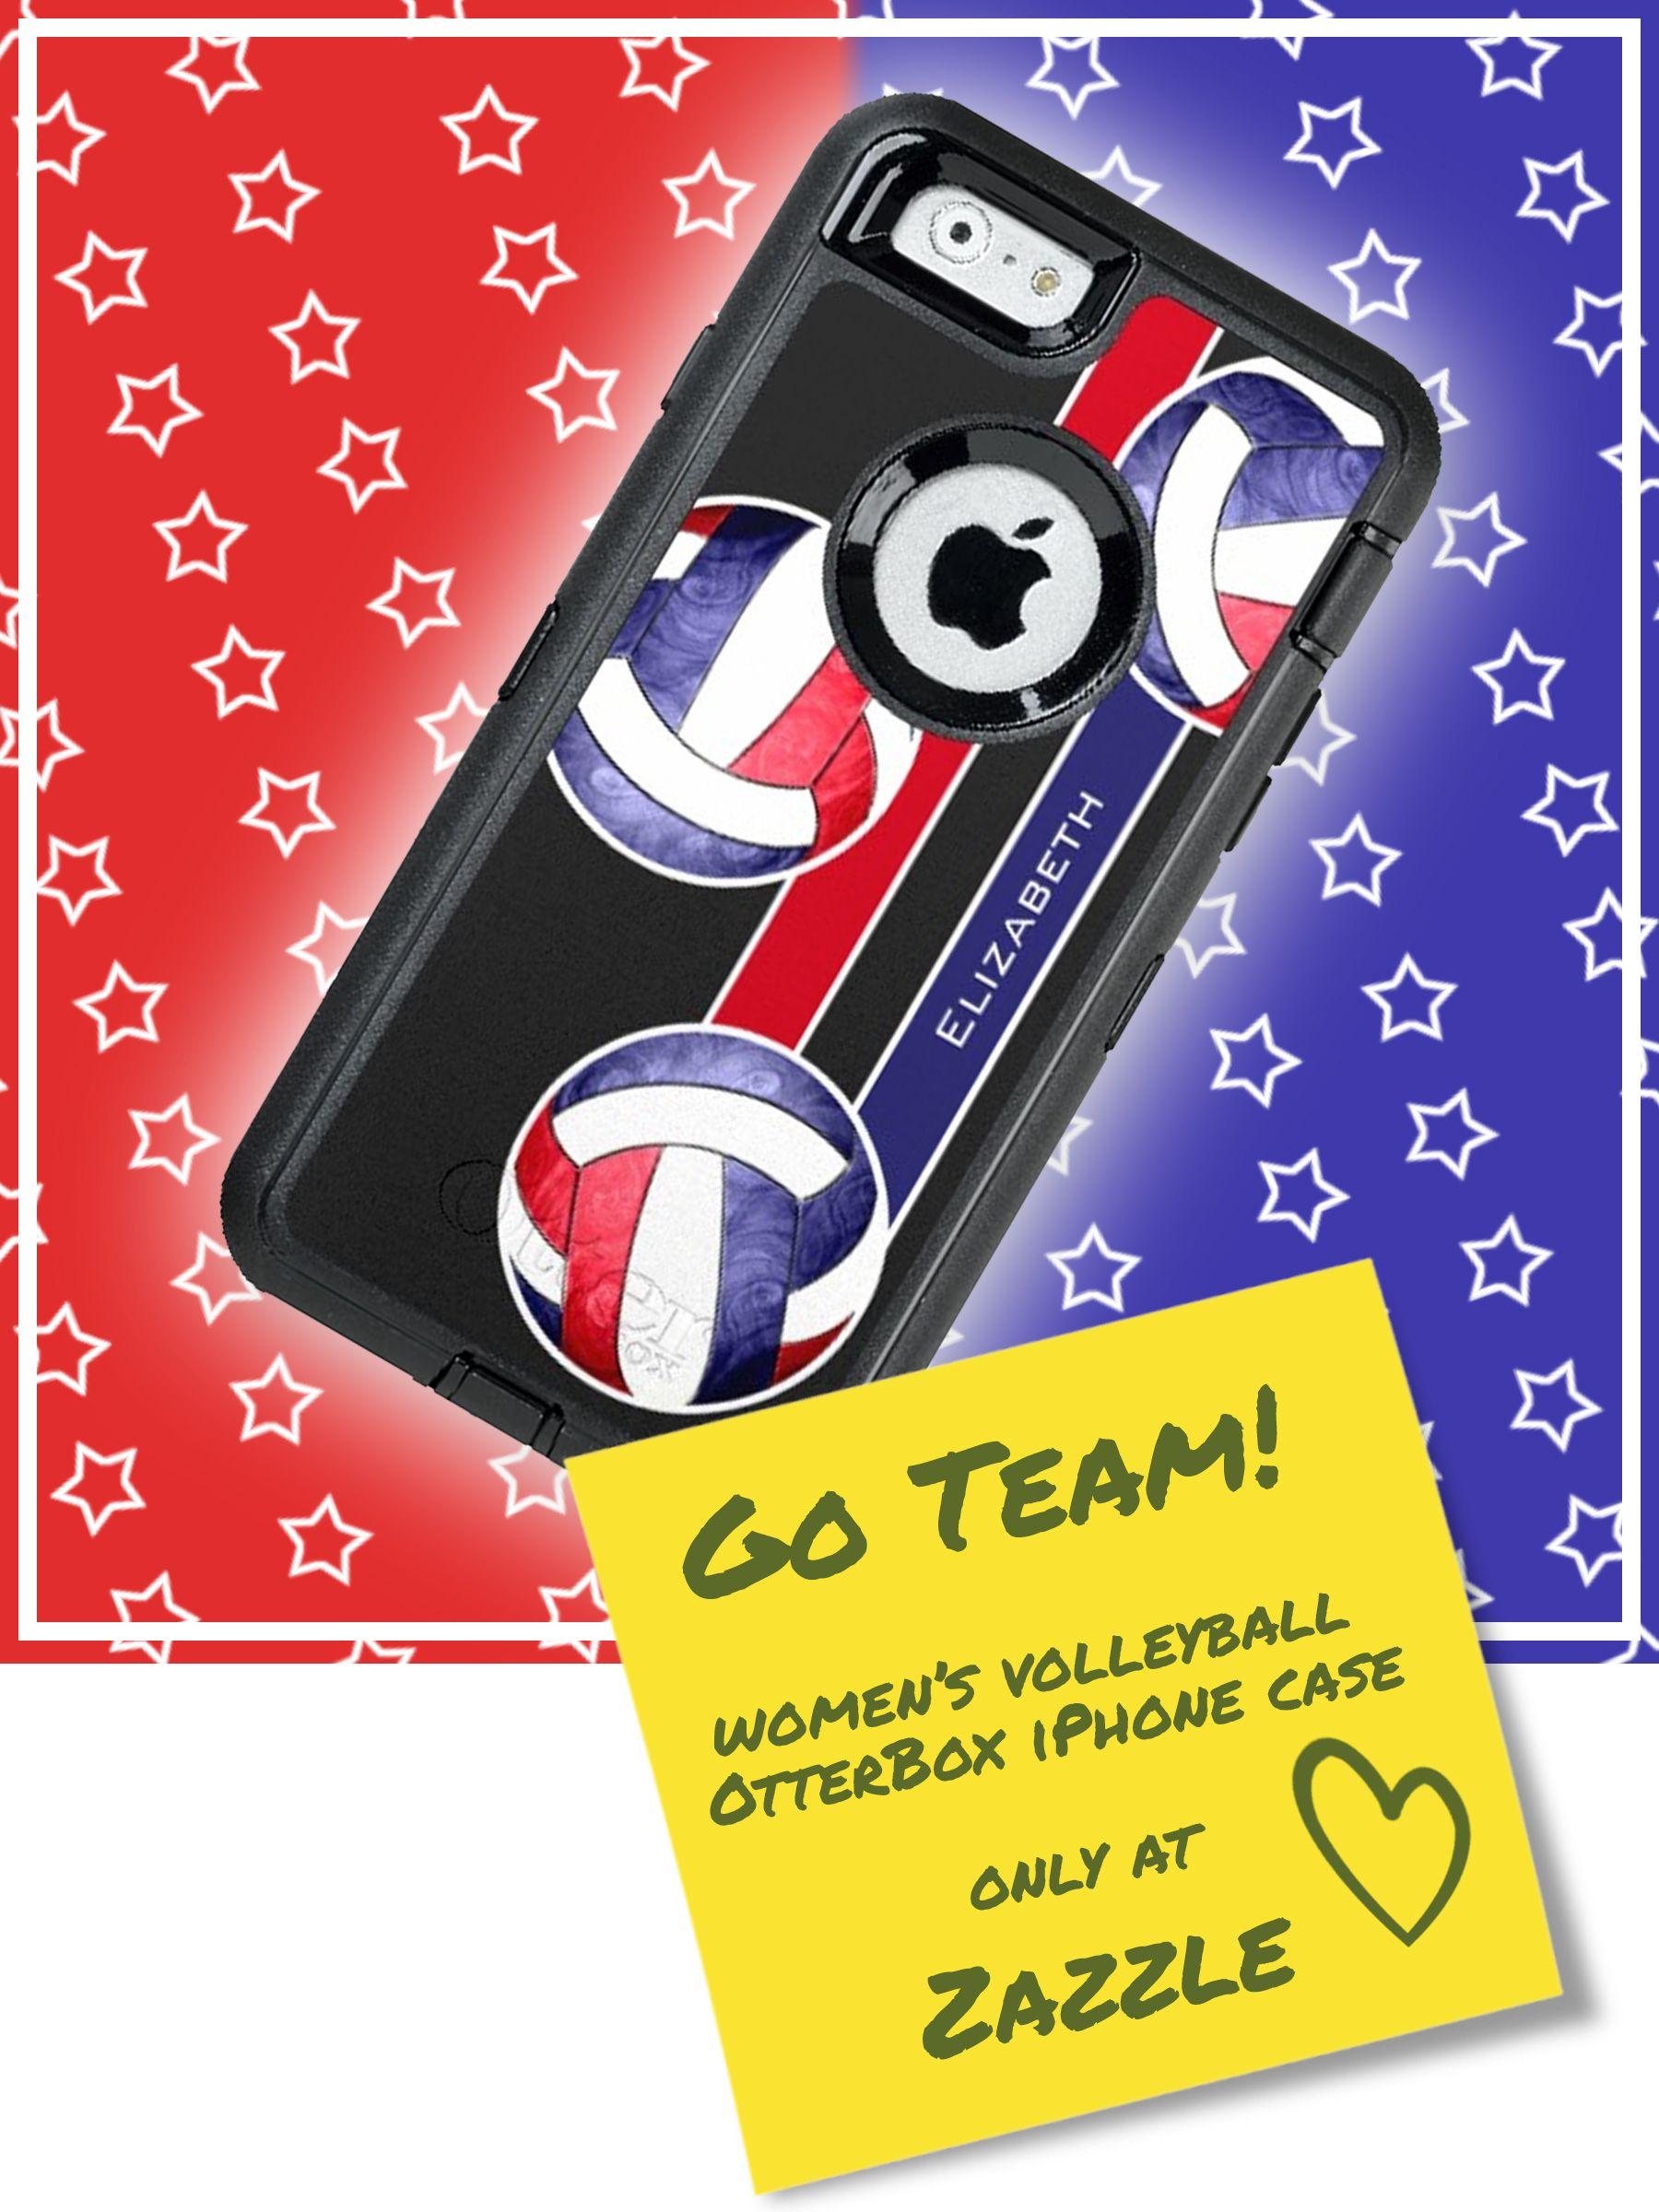 Red White and Blue D. Sports Logo - OtterBox IPhone 6 6s Case With Red, White And Blue Volleyballs